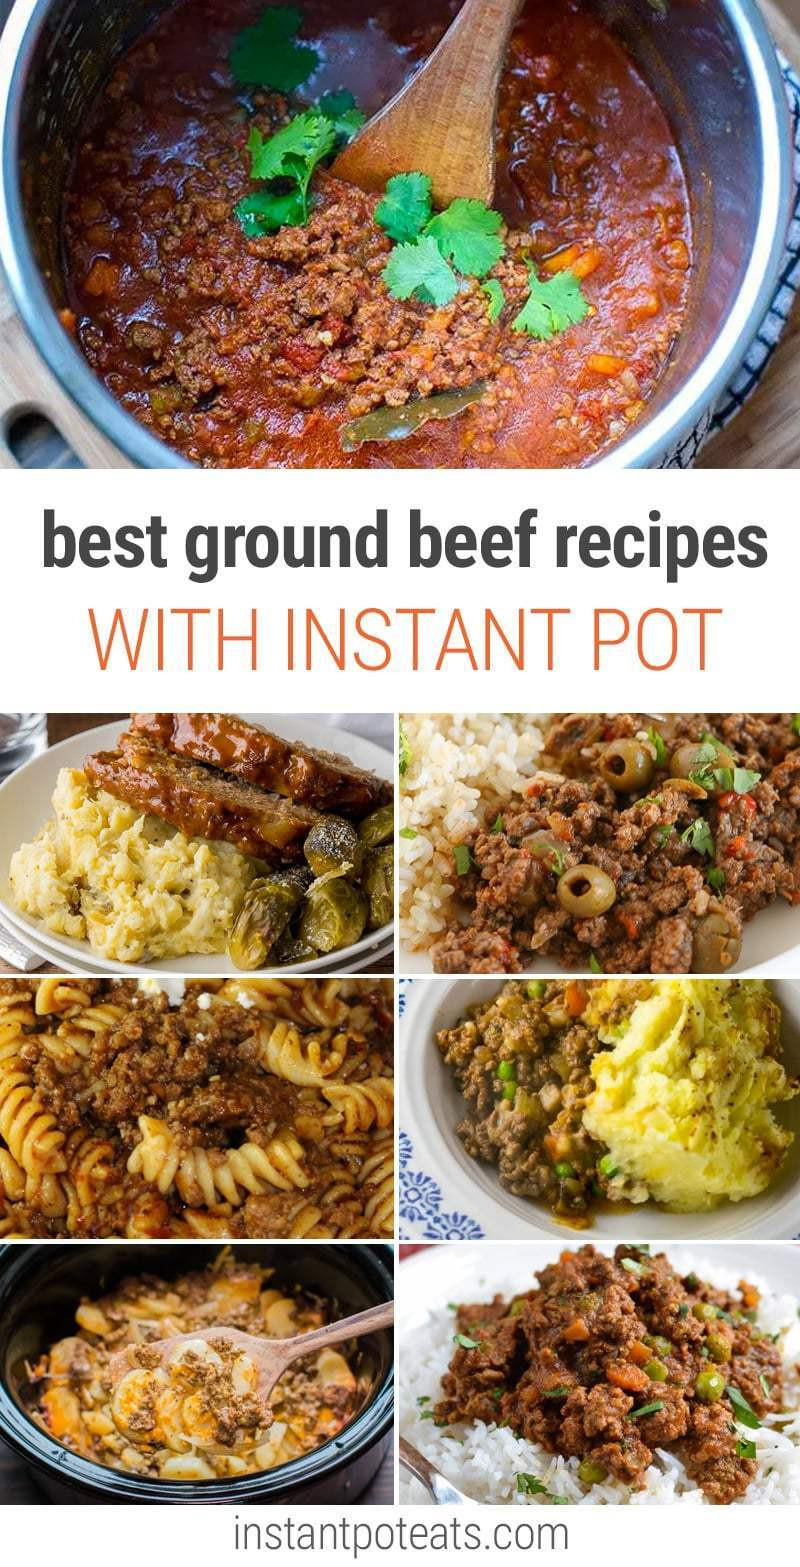 Instant Pot Recipes Ground Beef
 The BEST Instant Pot Ground Beef Recipes You Will Love